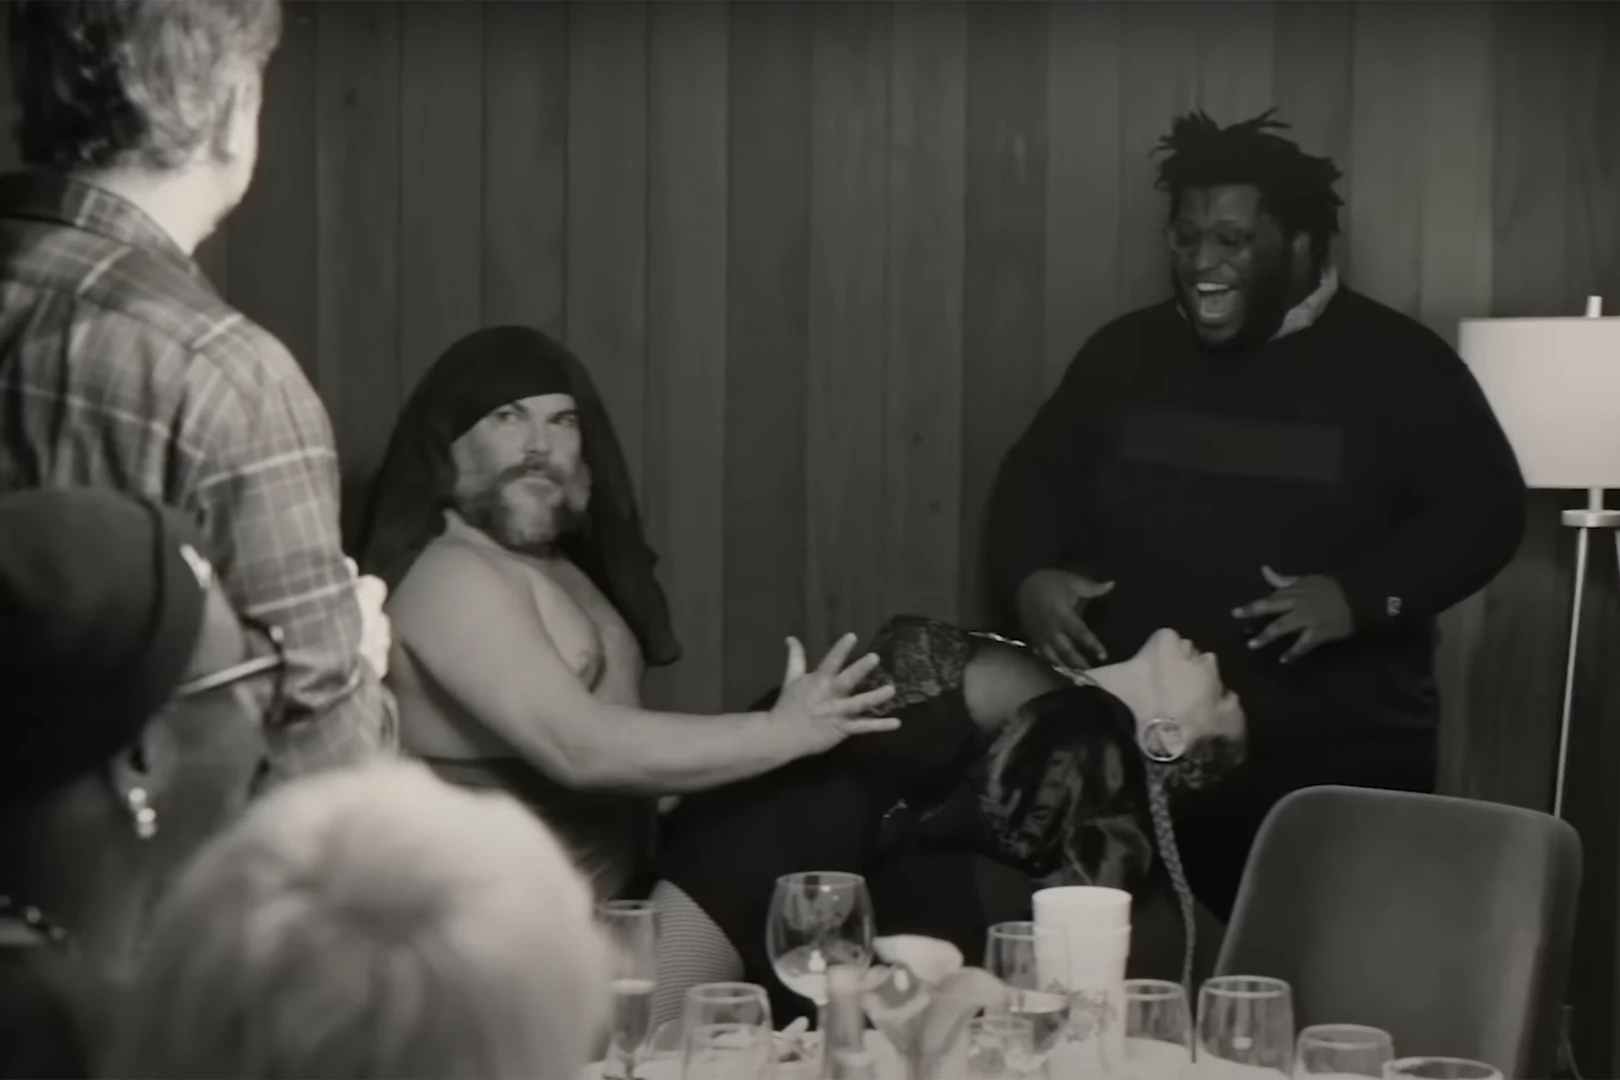 Watch Jack Black Make Out With Madonna In Totally NSFW Tour Video